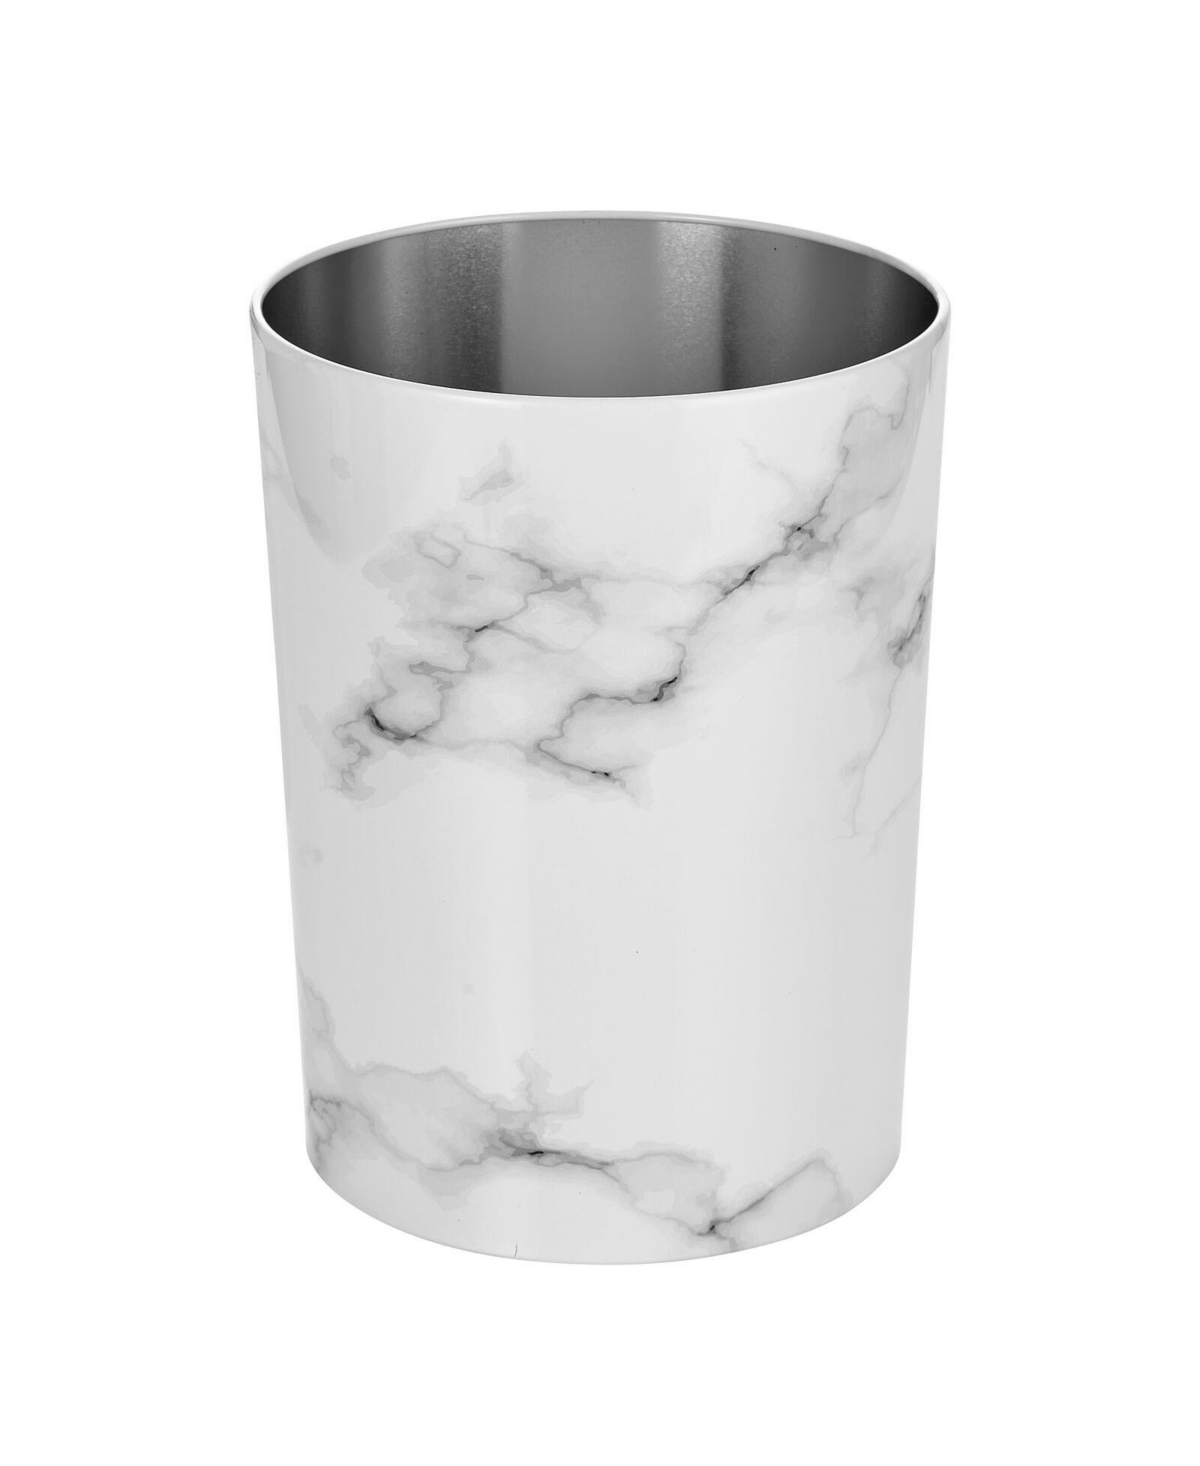 Round Metal Trash Wastebasket/Recycling Can - White marble